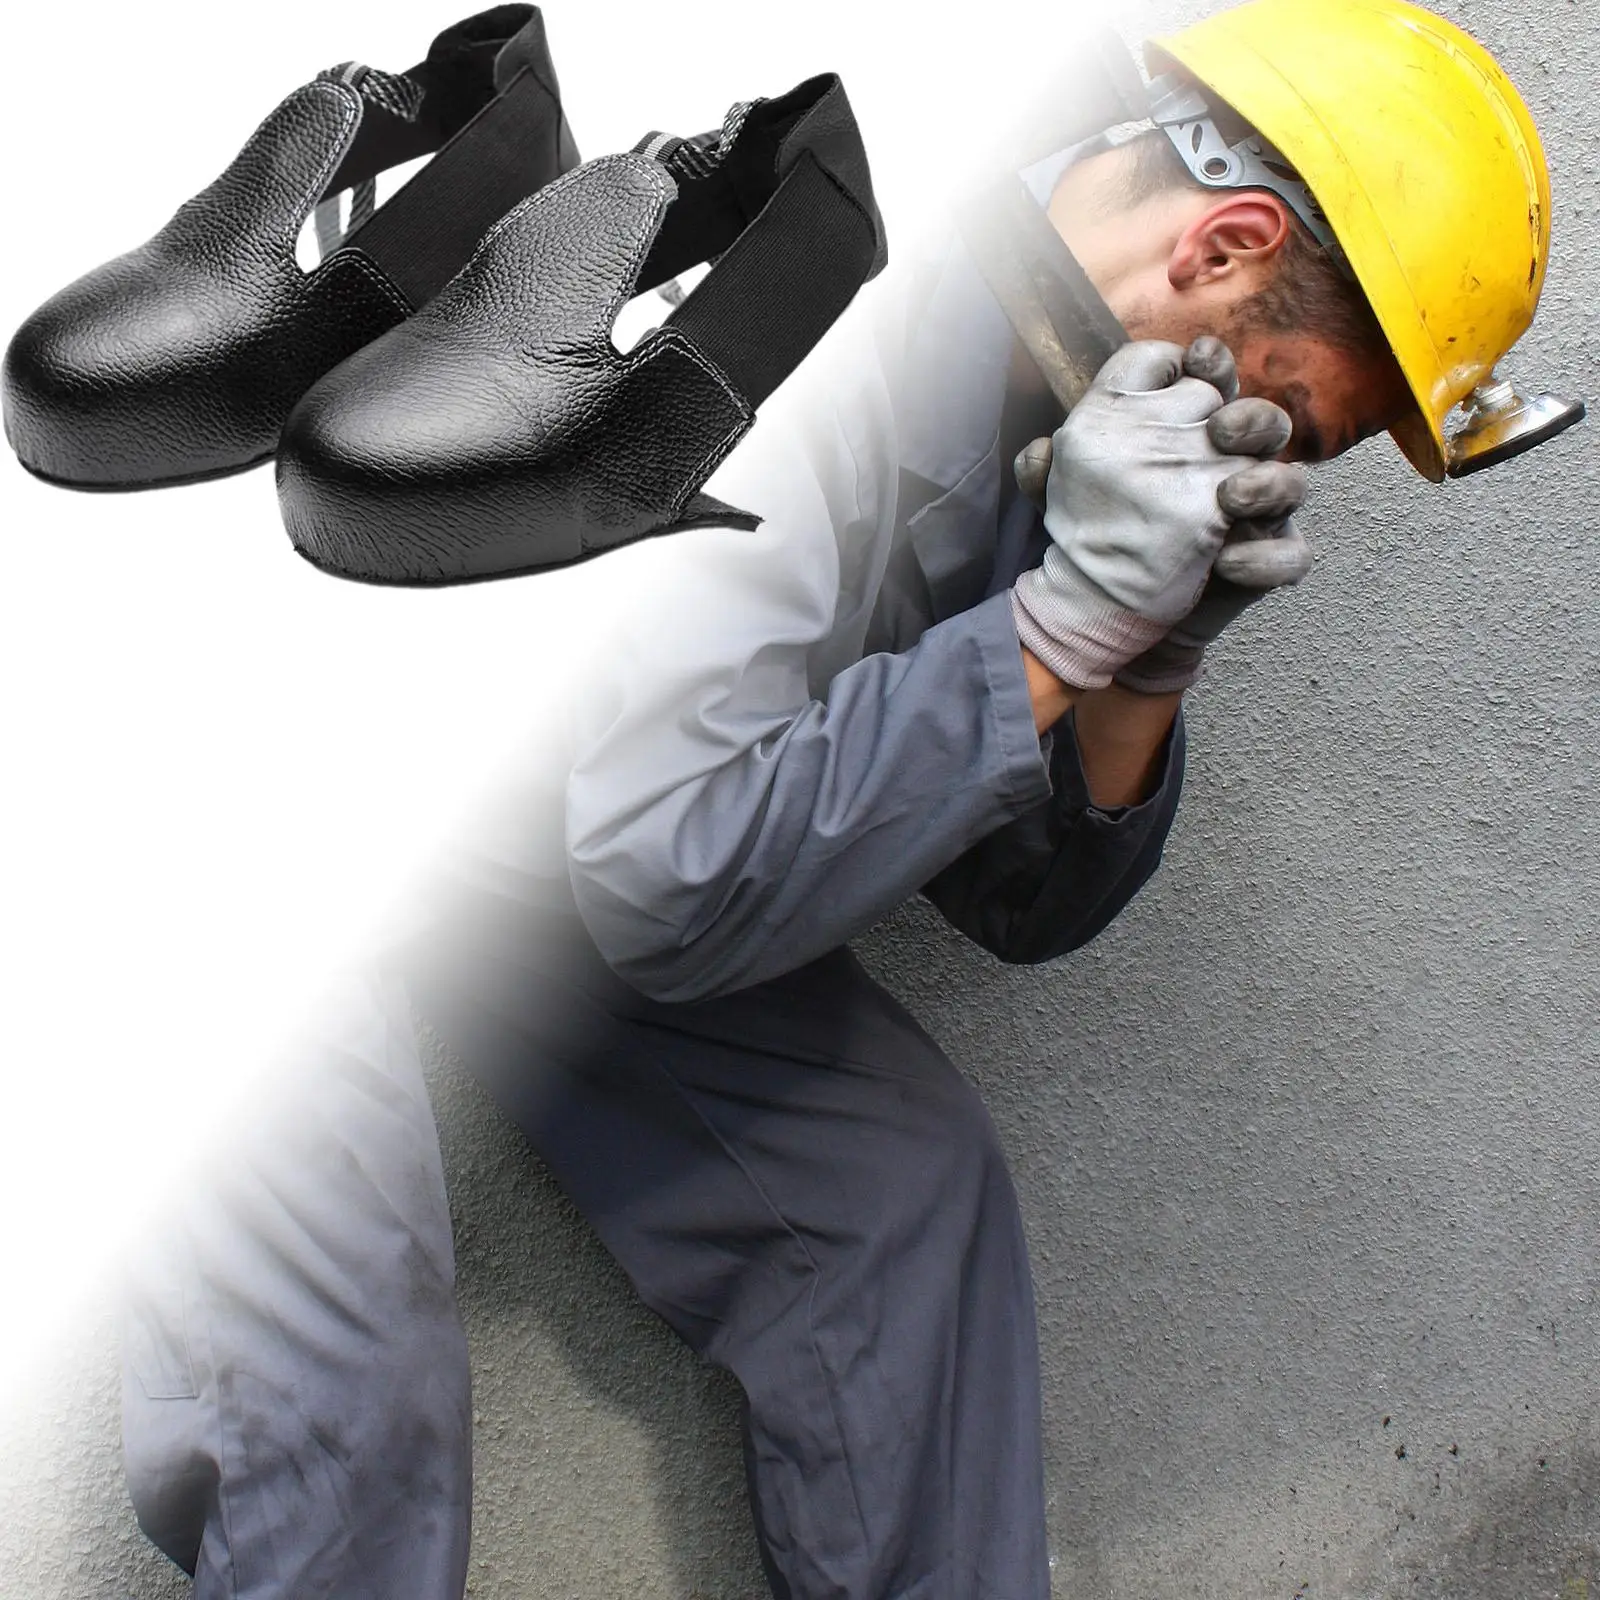 Leather Overshoes Covers Toe Caps Safe Overshoes, Portable Leather Sole Caps Non Slip Toe Safe Shoes Cover, for Industry